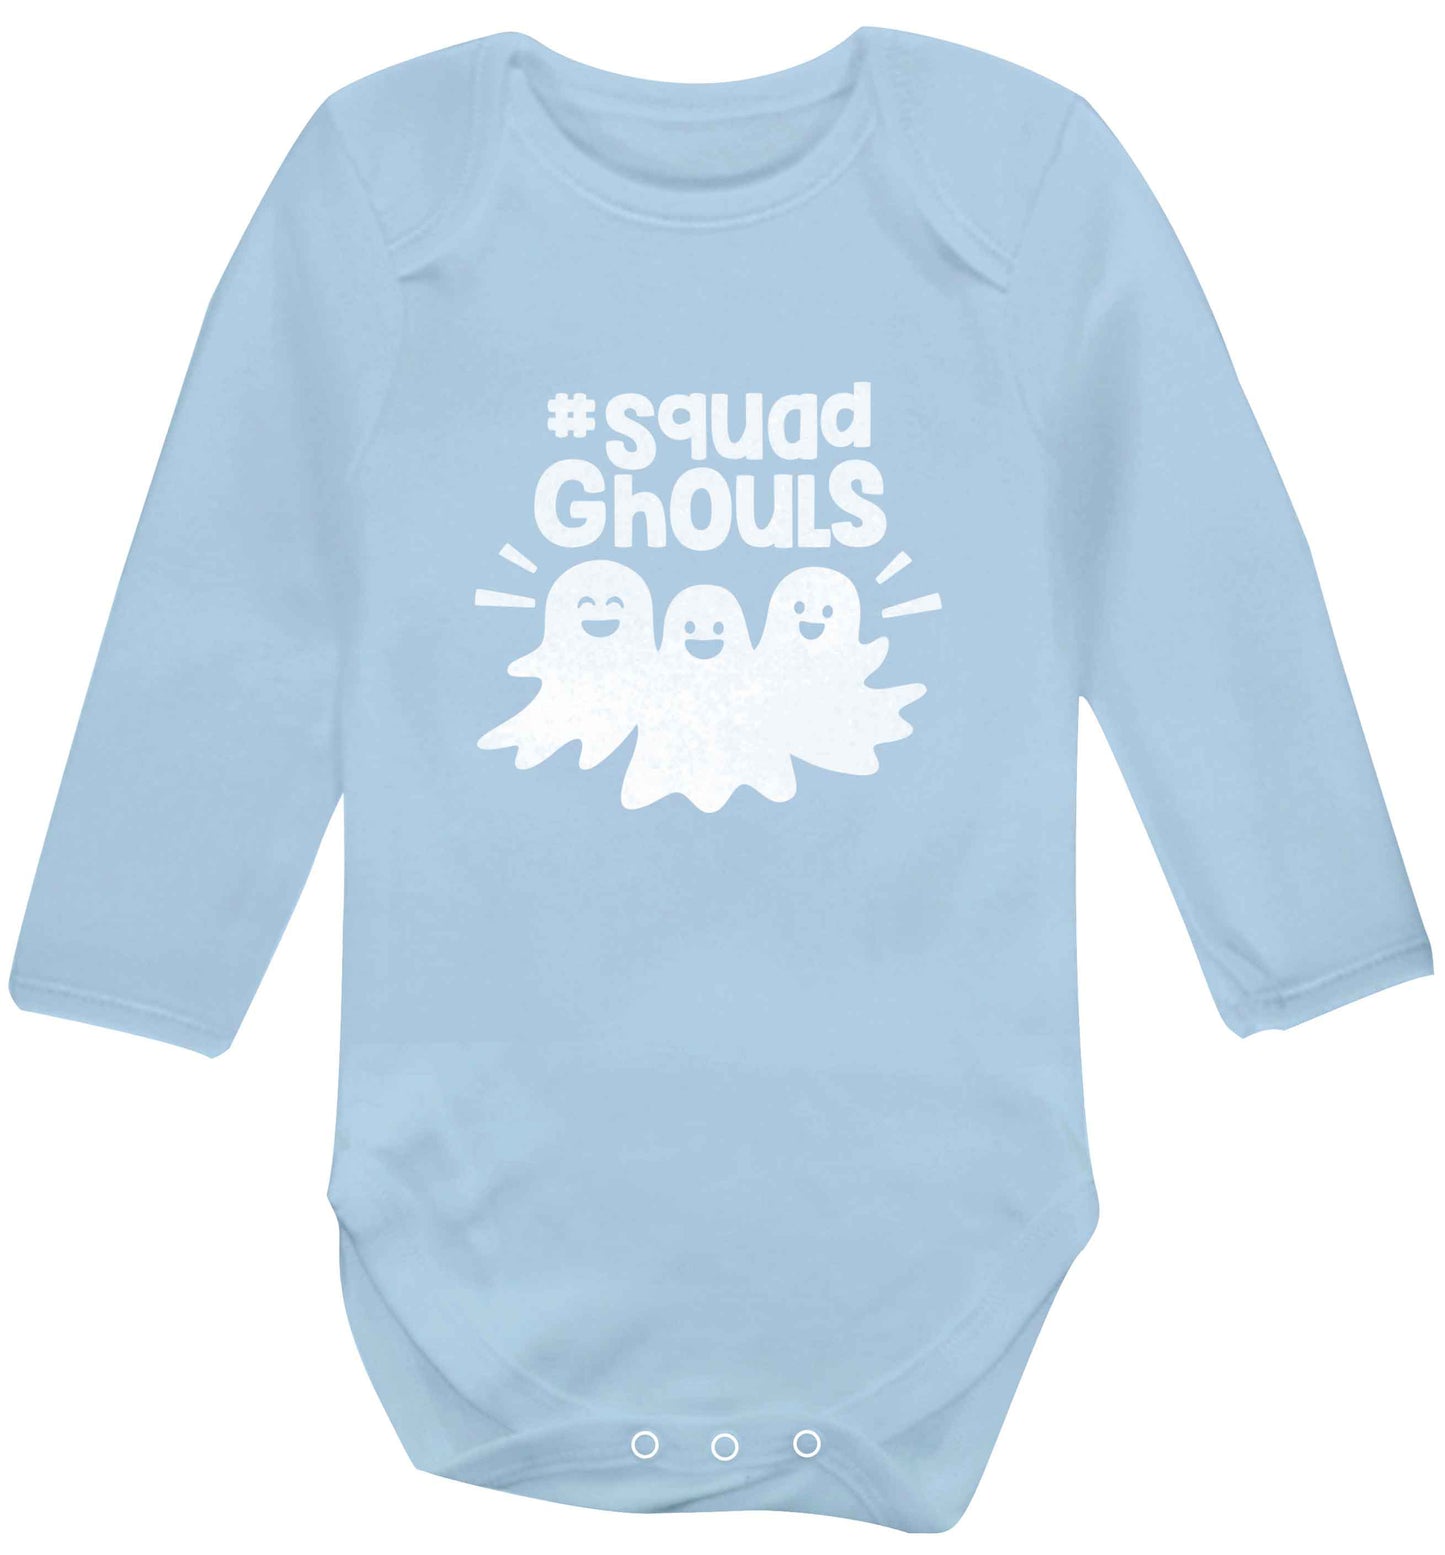 Squad ghouls Kit baby vest long sleeved pale blue 6-12 months